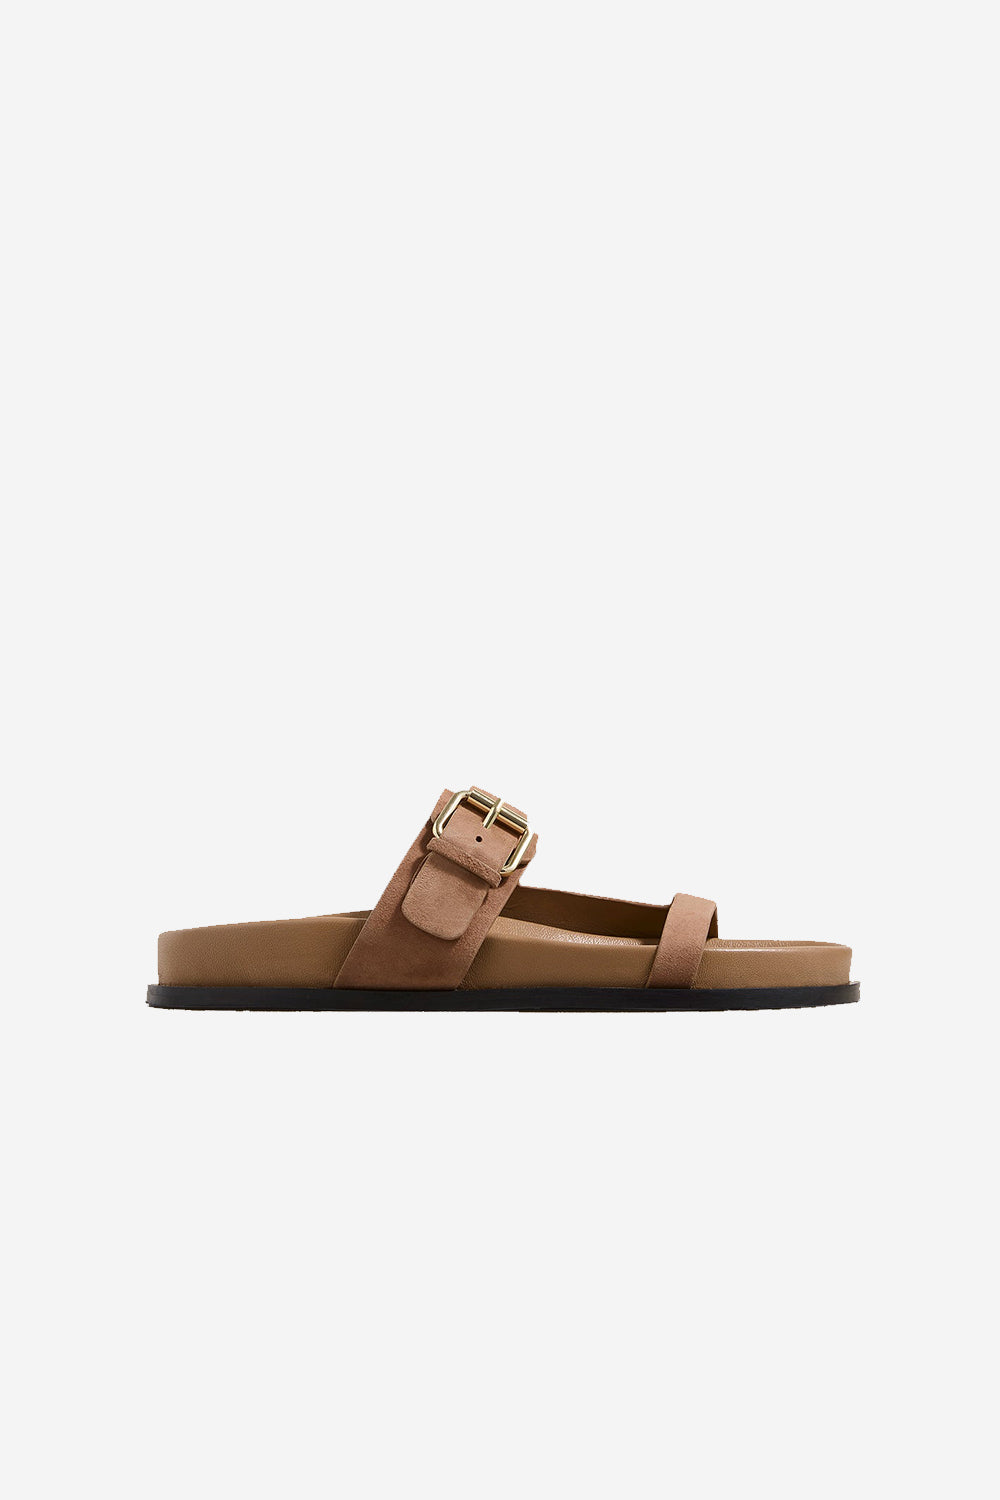 Womens Leather Sandal | A.Emery Prince | The Standard Store